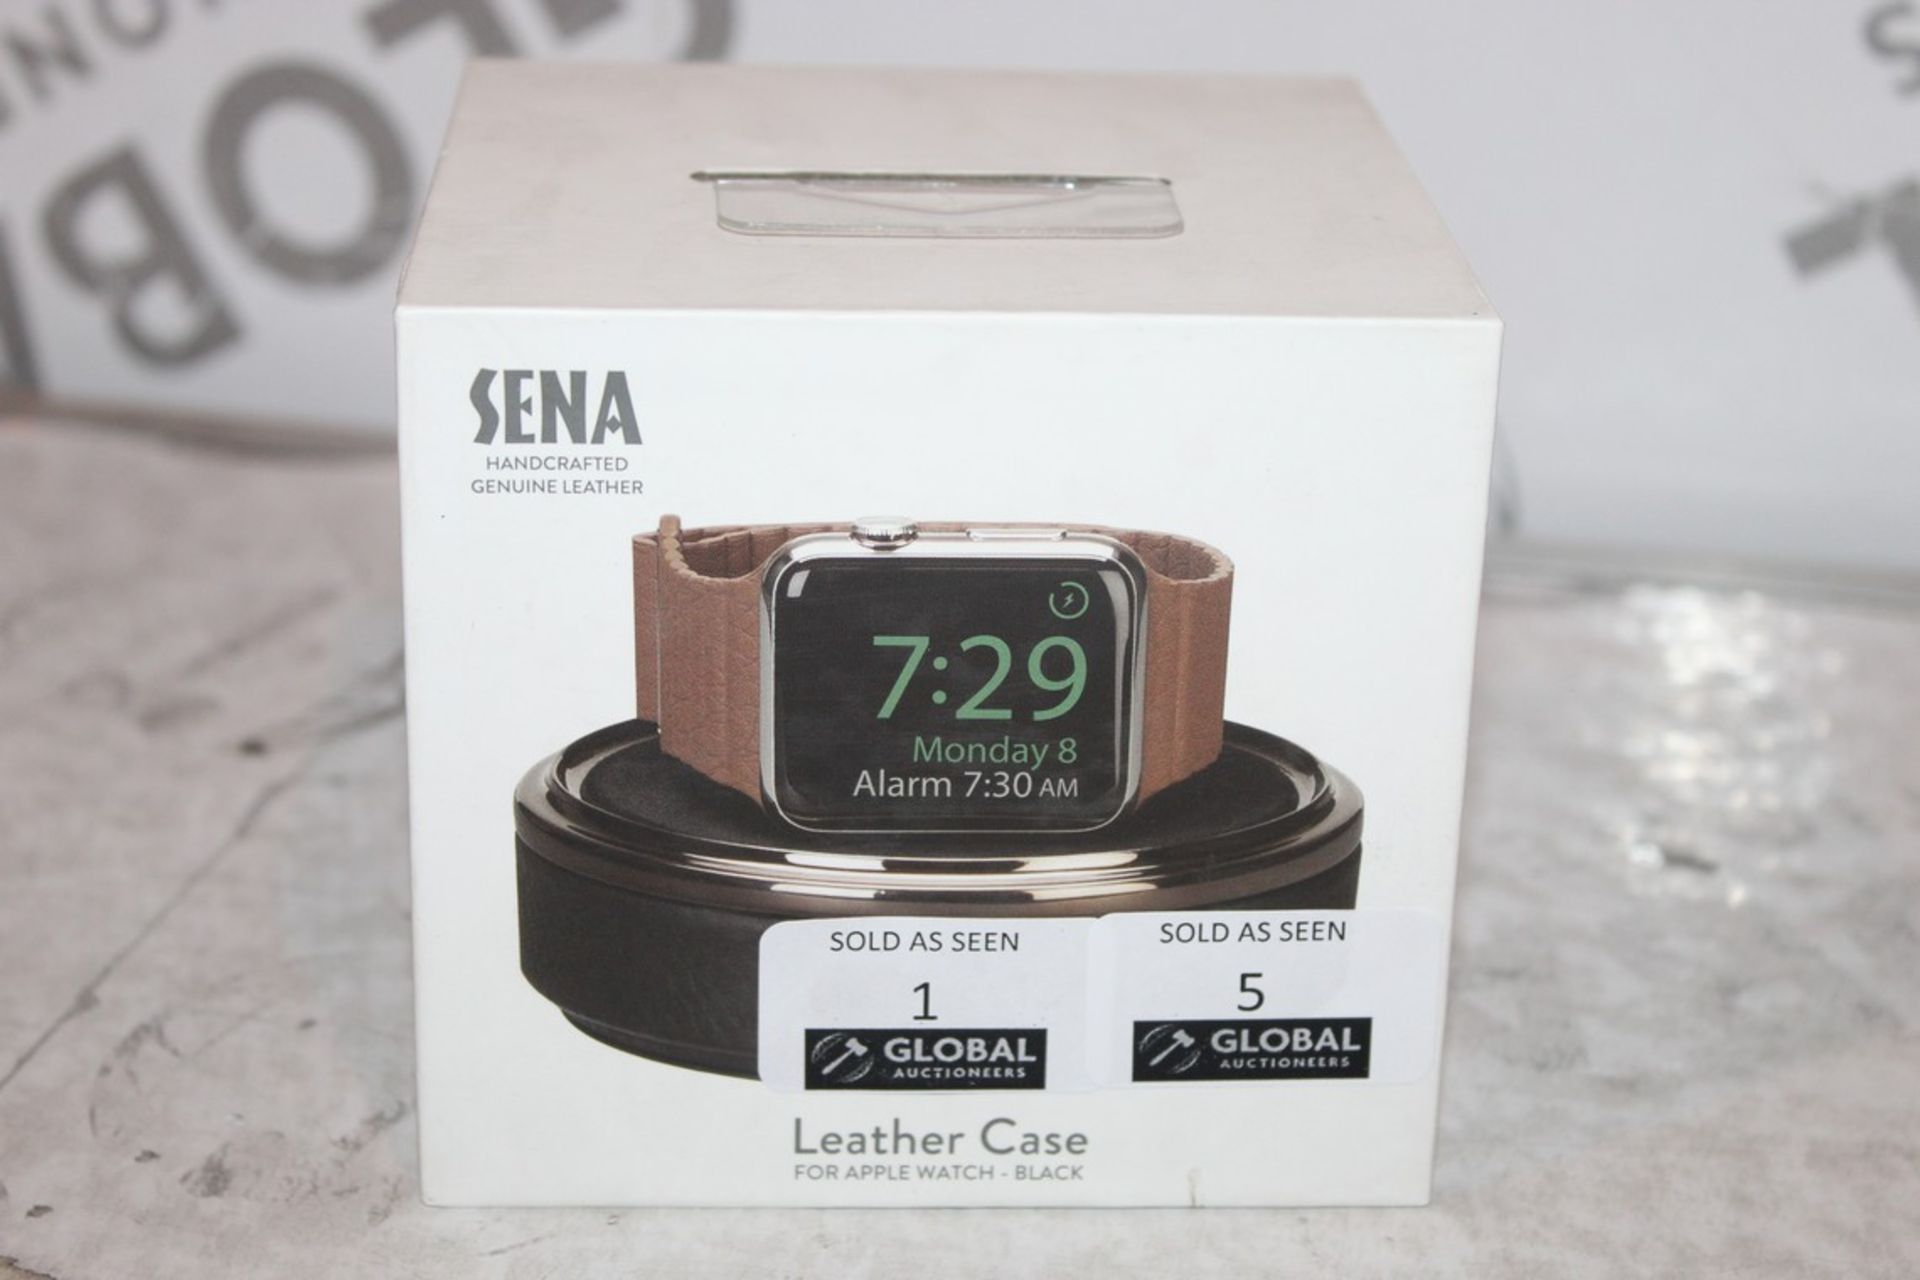 Boxed Brand-new Sena, Hand Crafted genuine Leather, Black Apple Watch Box, RRP£45.00